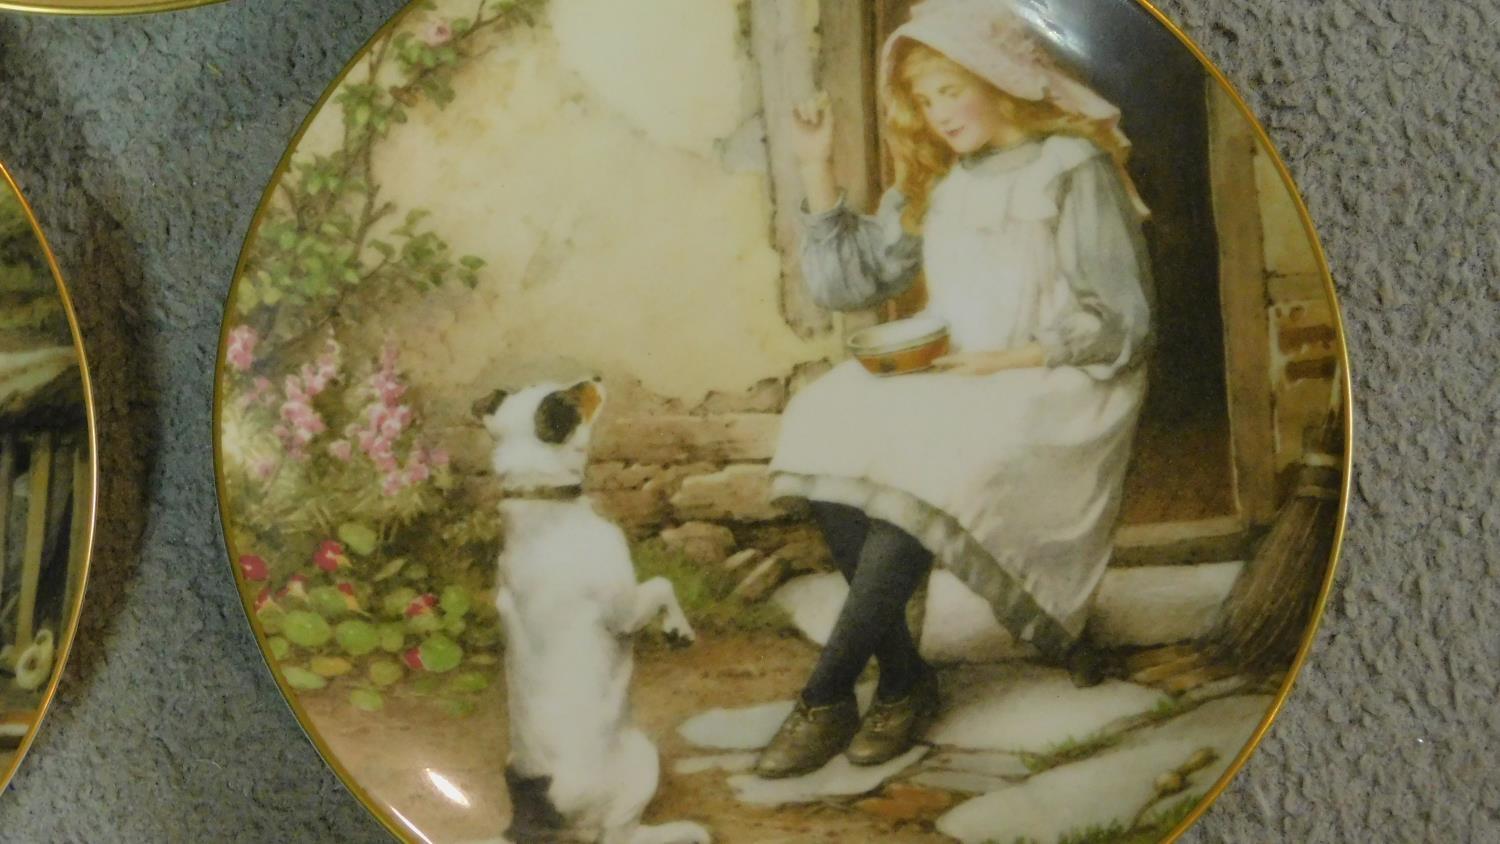 Three limited edition Wedgwood transfer wall plates by Charles Edward Wilson 'Yesterday's Child' - Image 3 of 5